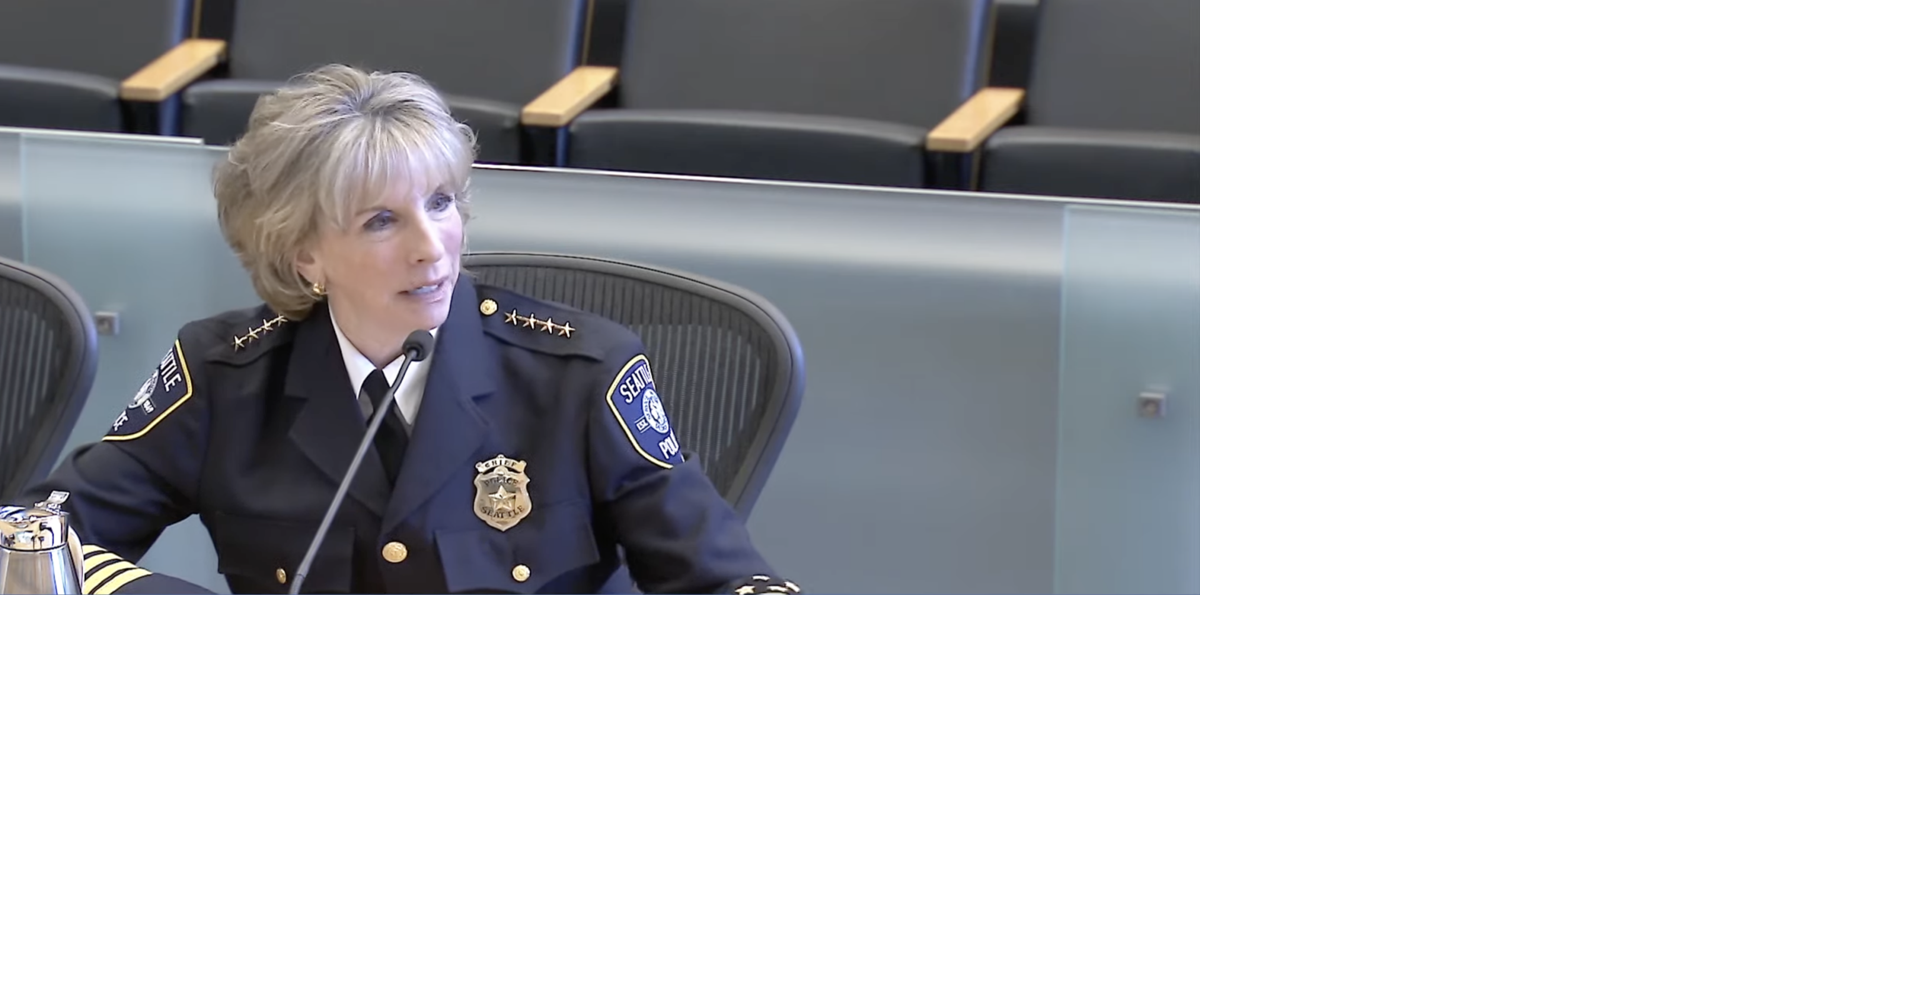 SPD interim chief calls for hiring process changes as staffing woes continue